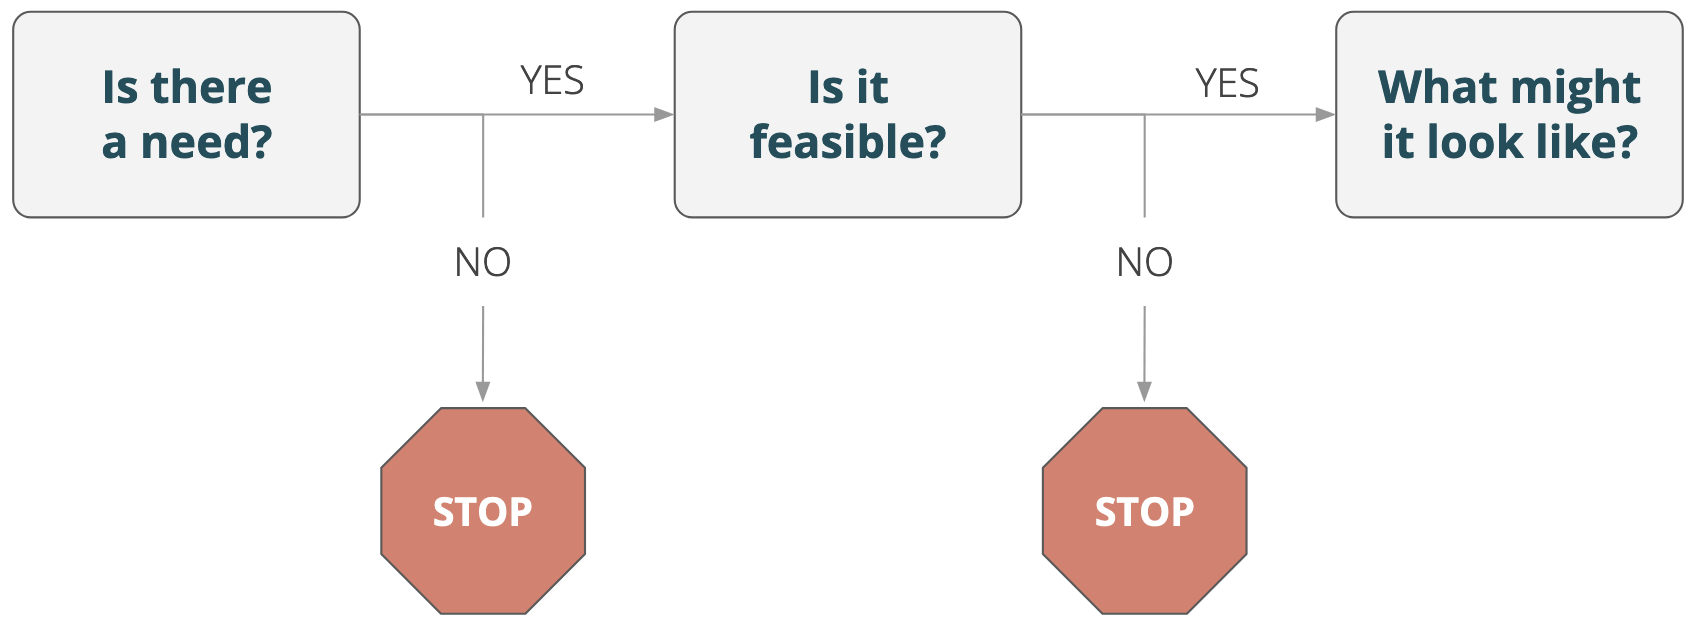 "Flow chart beginning with 'Is there a need?' which splits into yes (Is it feasible?) and no (stop), then 'Is it feasible?' splits into yes (What might it look like?) and no (stop)."